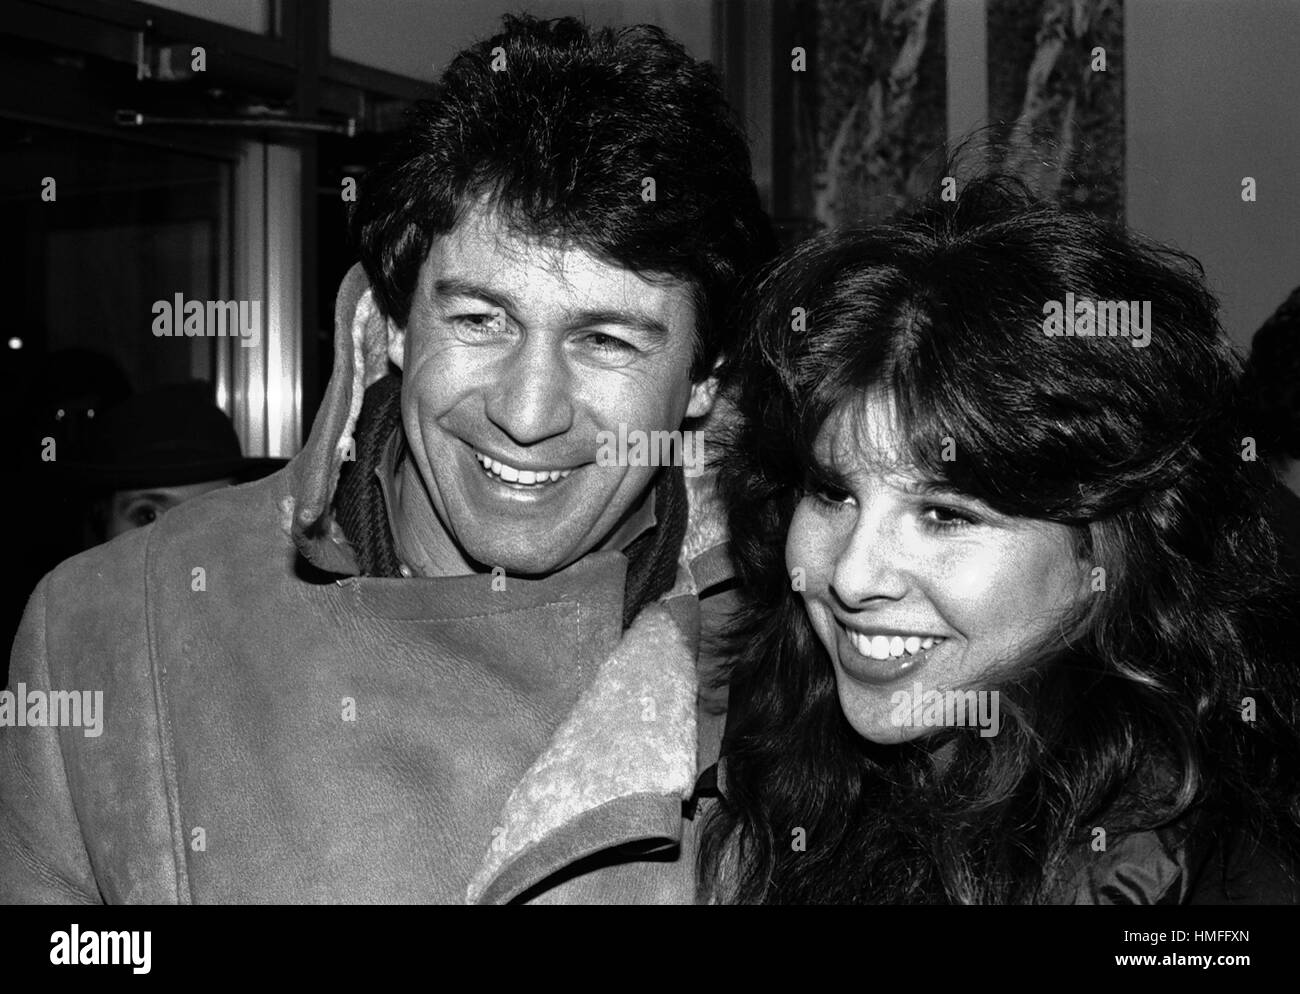 Joey Travolta attending the Opening Night Performance of thye new Broadway Hit Musical DREAMGIRLS at the Imperial Theatre in New York City. December 20, 1981 Stock Photo